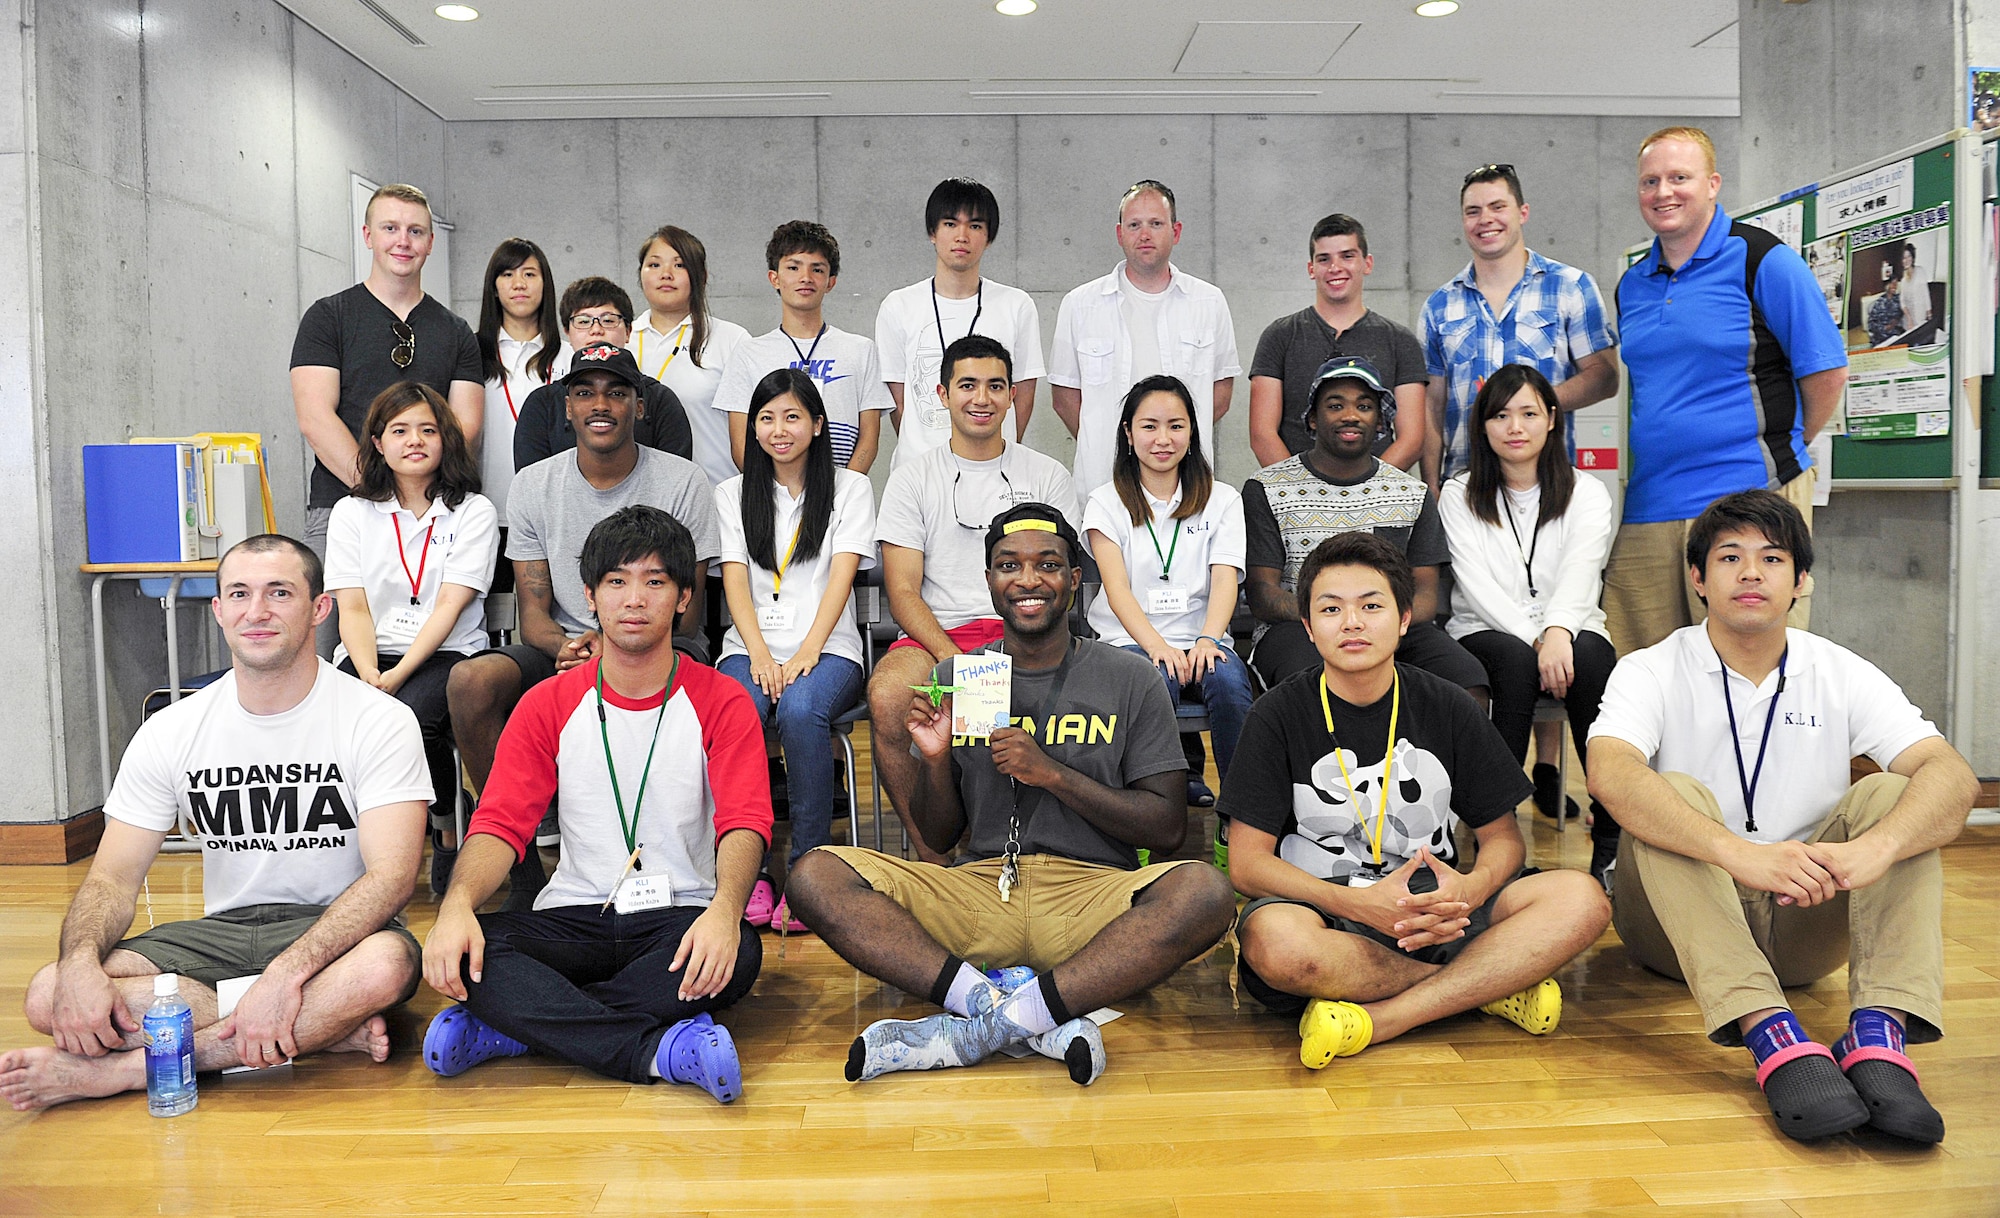 Kadena Language Institute students pose with volunteers from the 18th Wing for a group photo after a culture exchange at Kadena Rotary Plaza, Japan, Aug. 14, 2015. Ten volunteers participated with the institute to clean the neighborhood as part of a community relations event while also conversing with KLI students in English. (U.S. Air Force photo by Naoto Anazawa/Released)